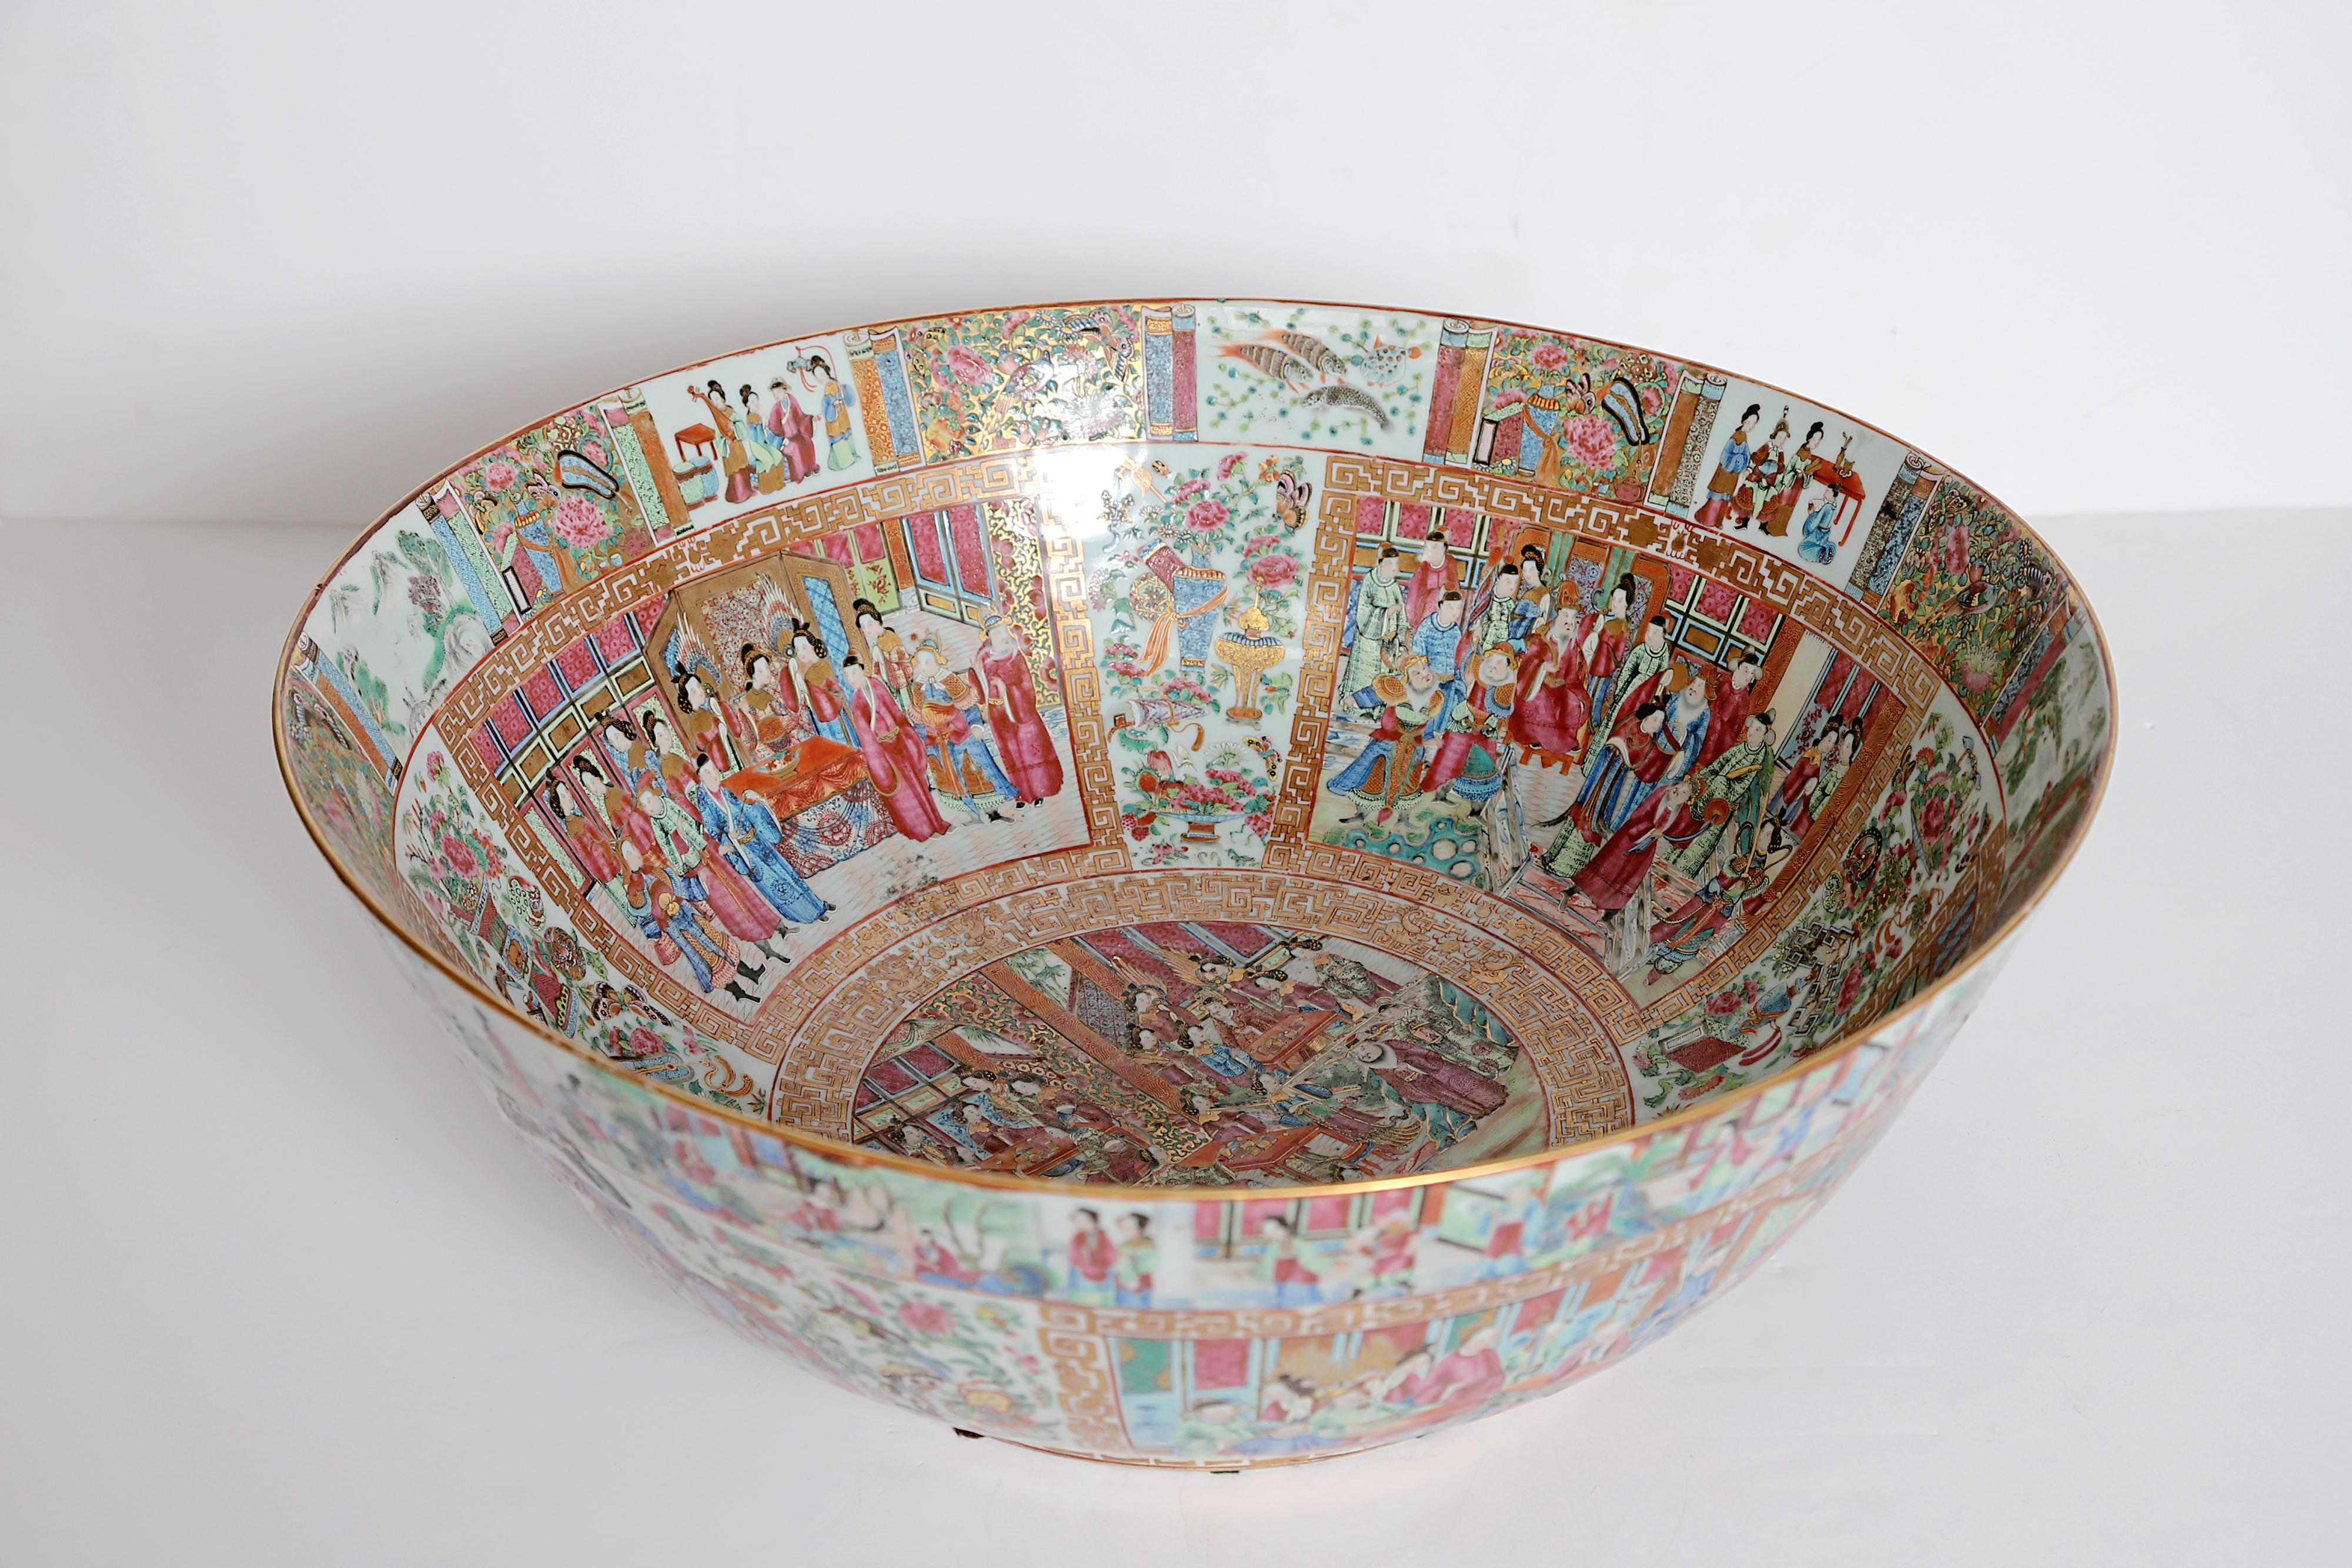 Large Scale Punch Bowl / Chinese Export Rose Medallion 12